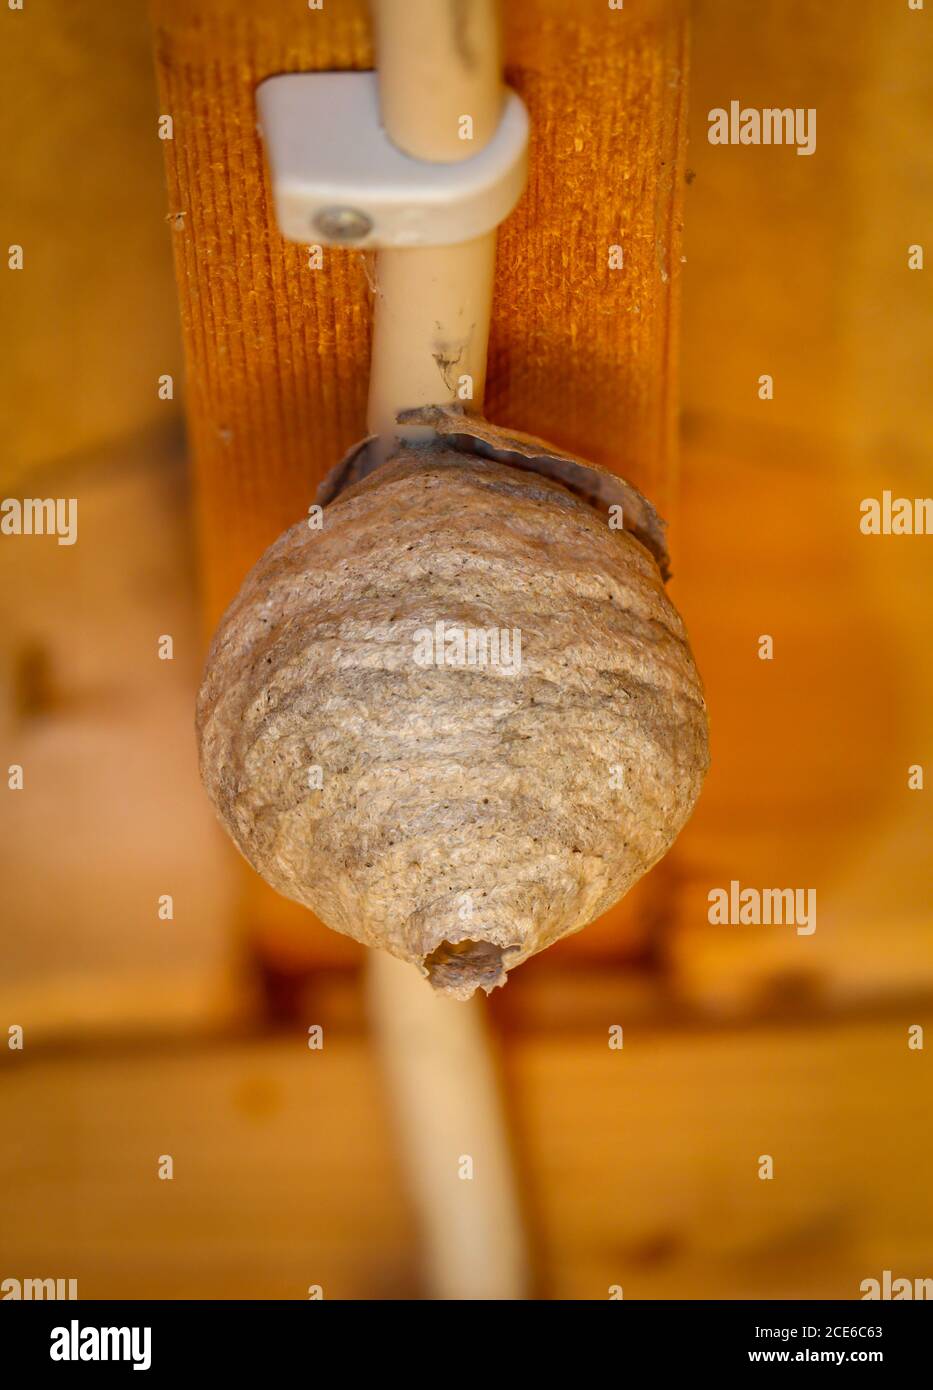 The start of a wasp nest under construction on a ceiling. Stock Photo